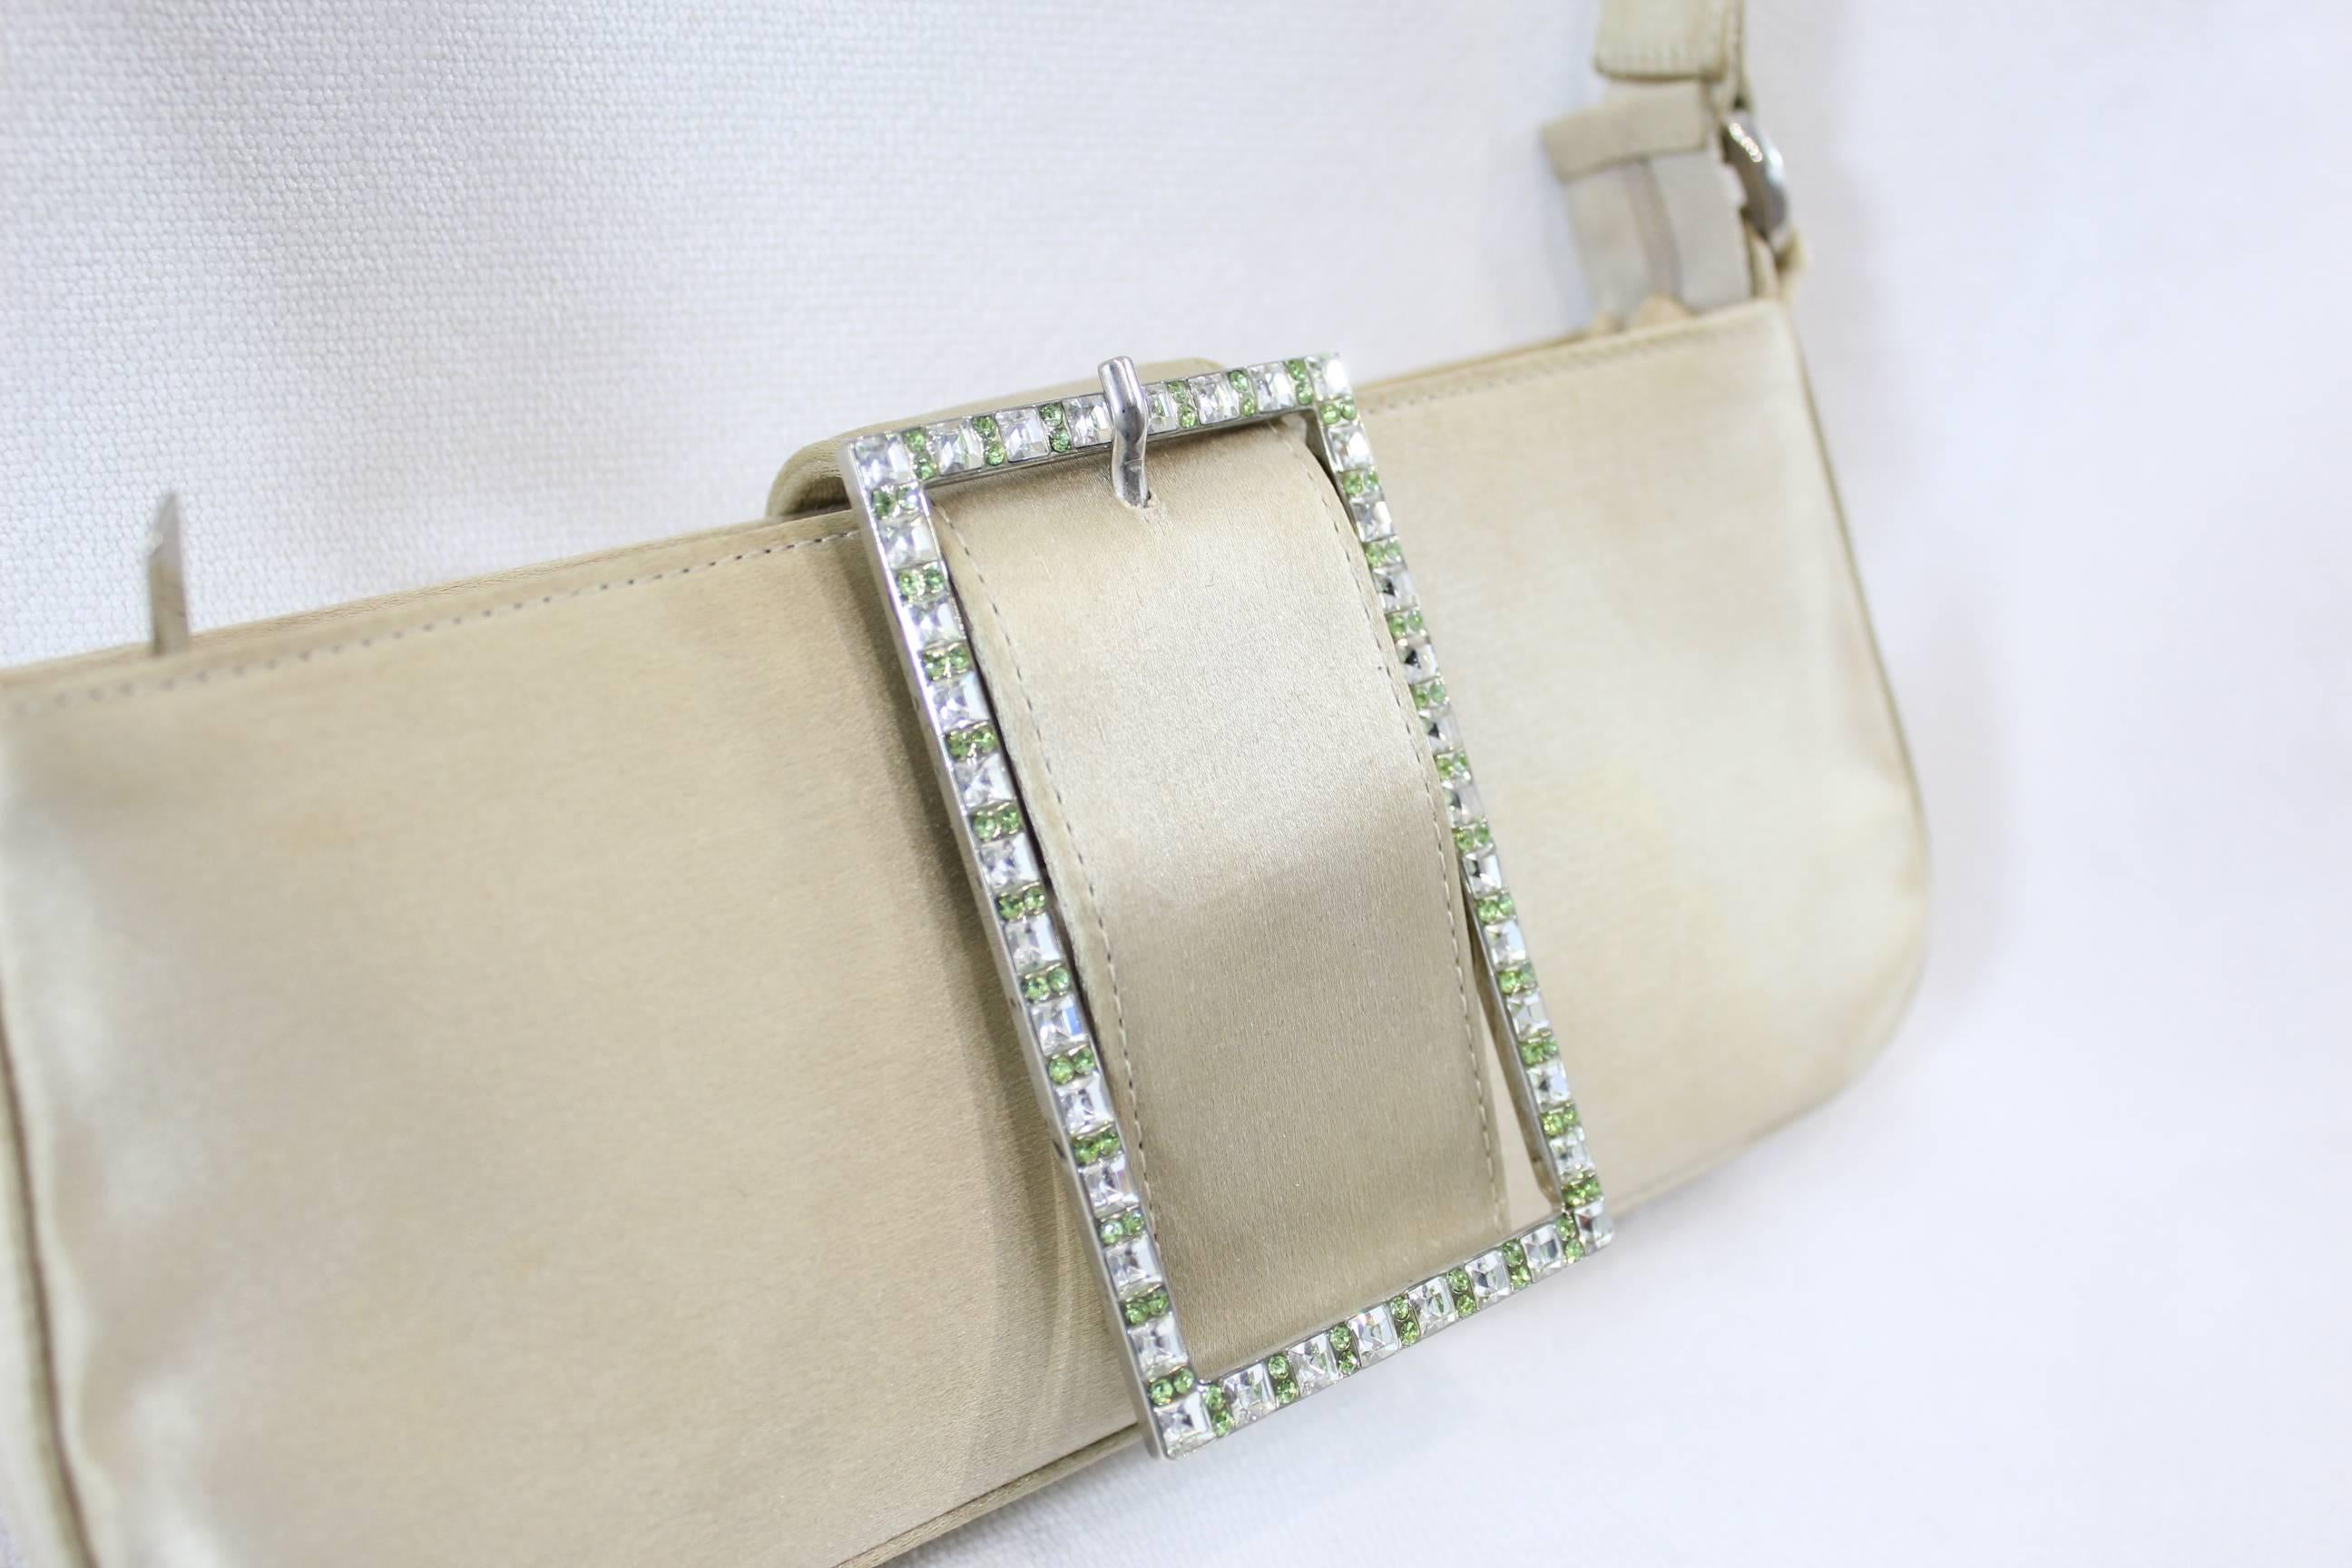 Jimmy Choo small Weeding Bag with Swarovsky Crystals In Fair Condition For Sale In Paris, FR